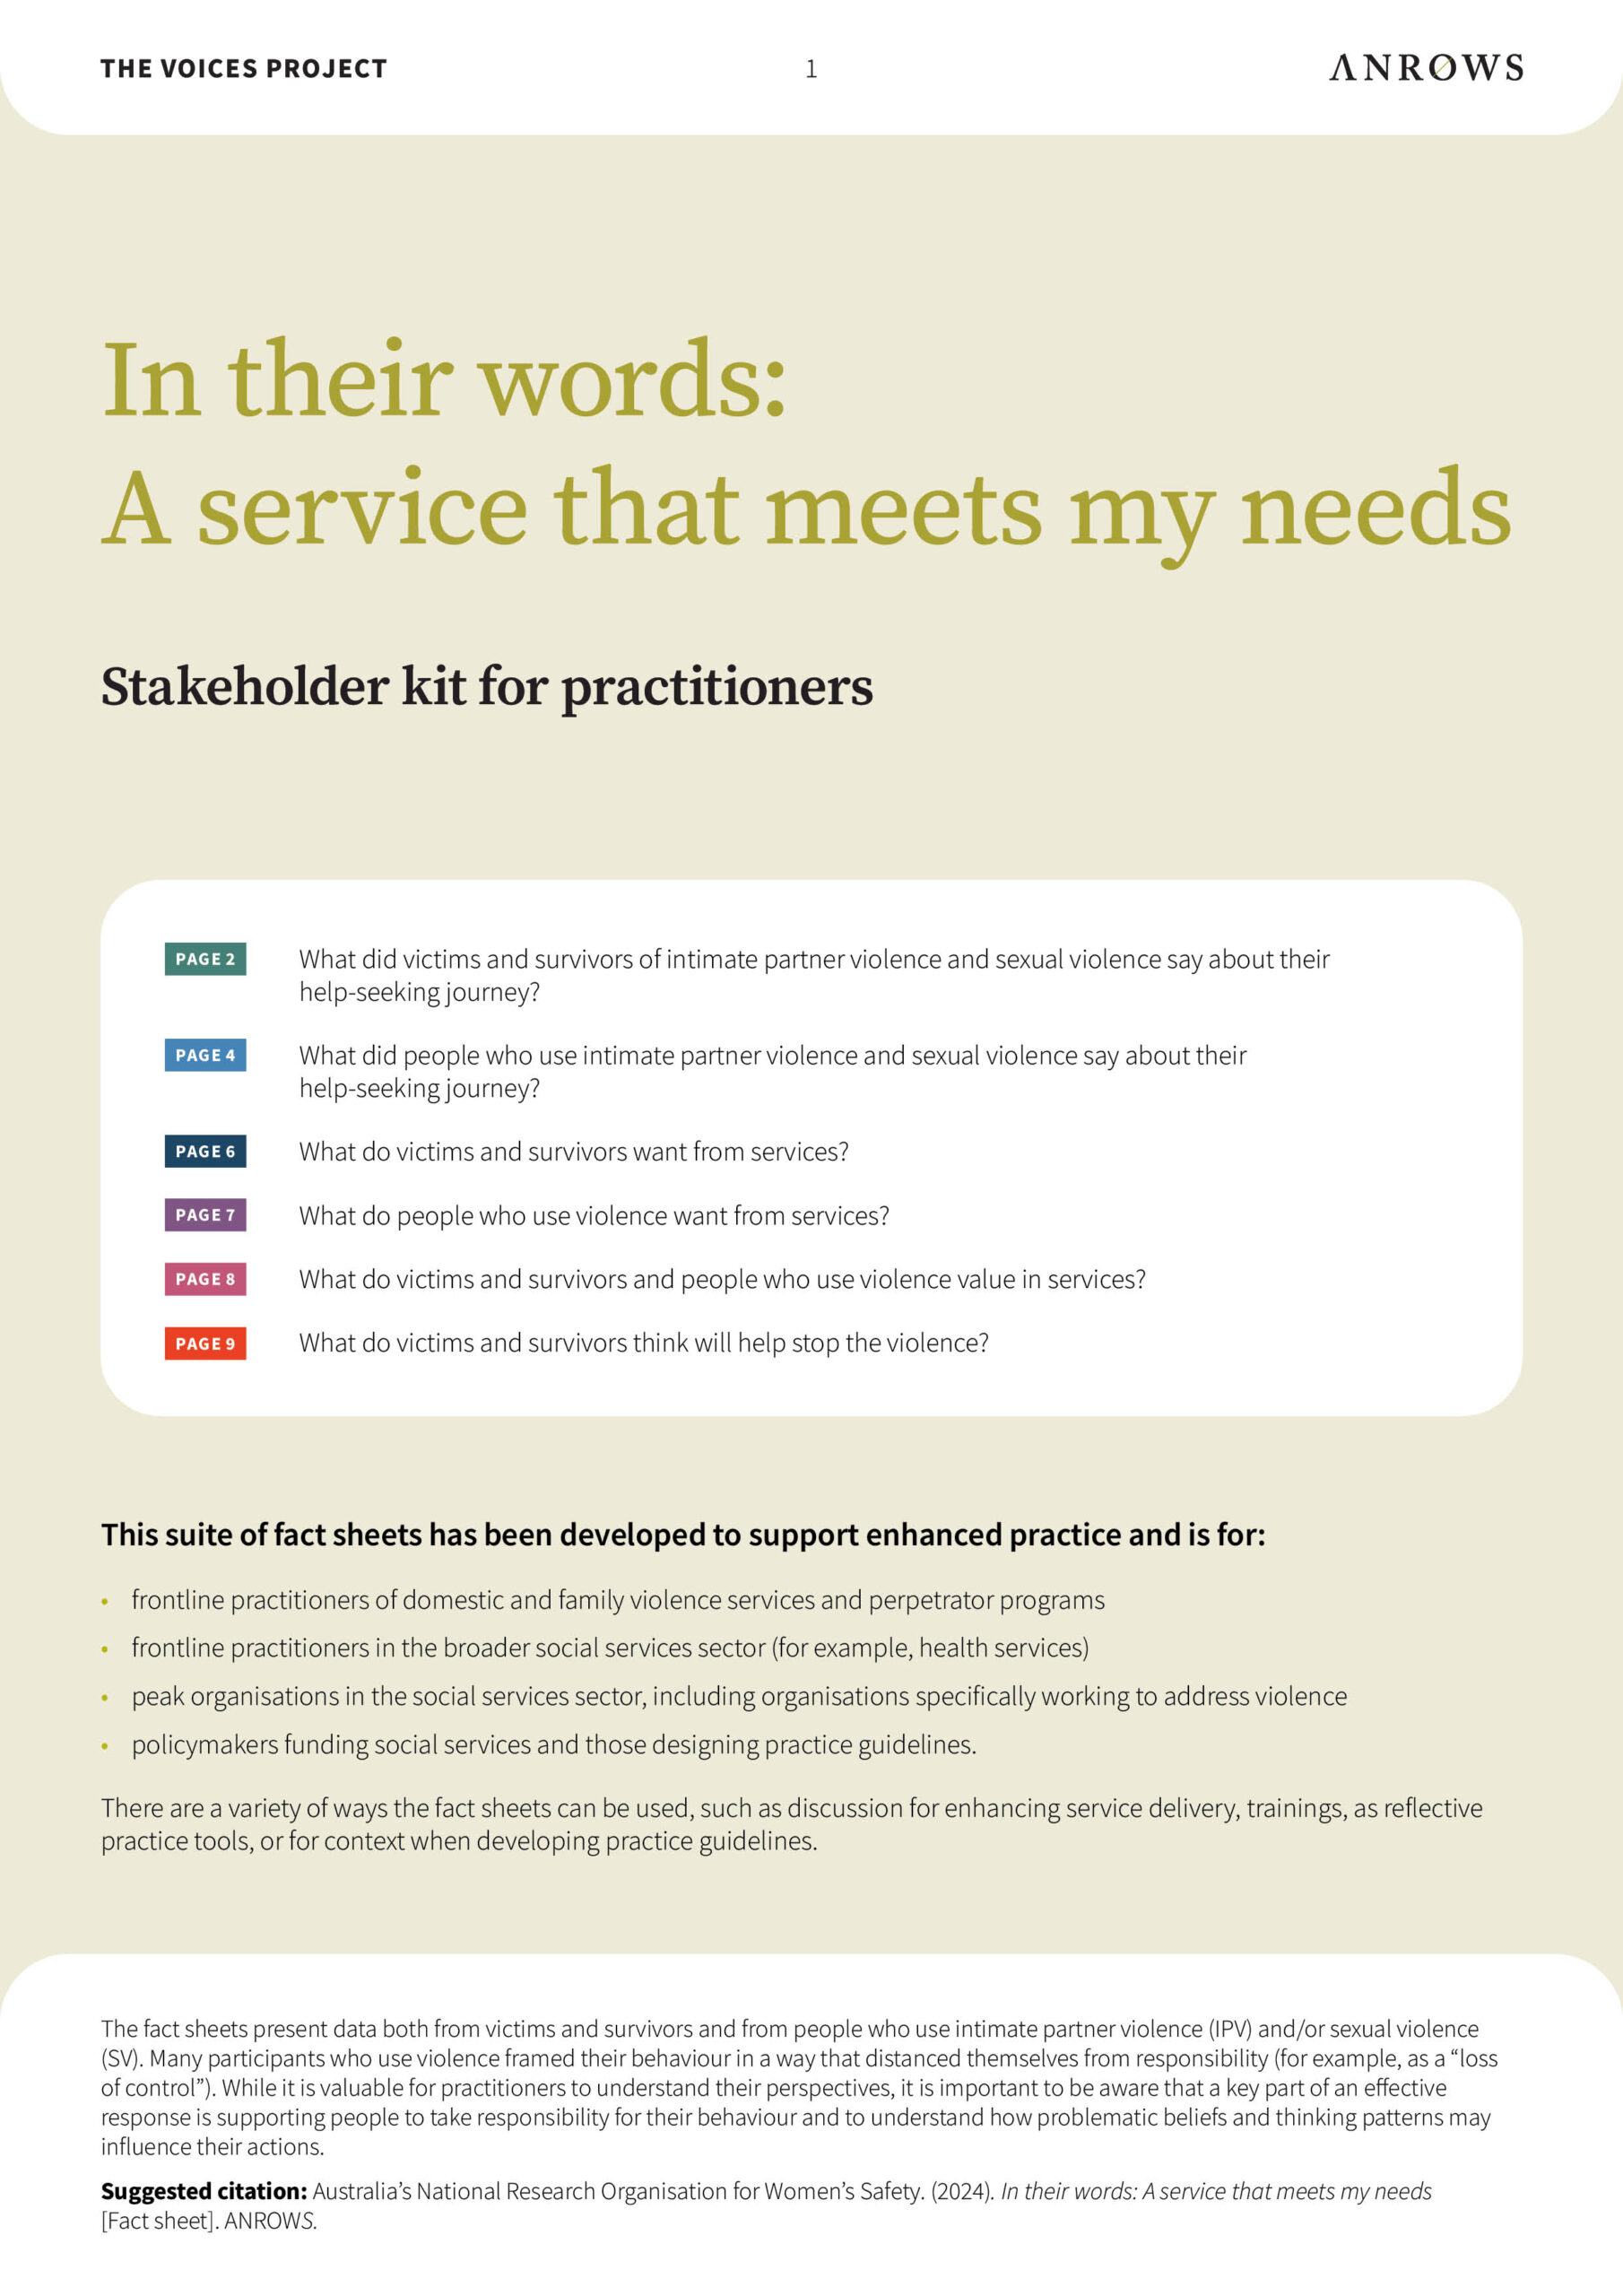 In their words: Stakeholder kit for practitioners – findings from the <i></noscript>Voices Project